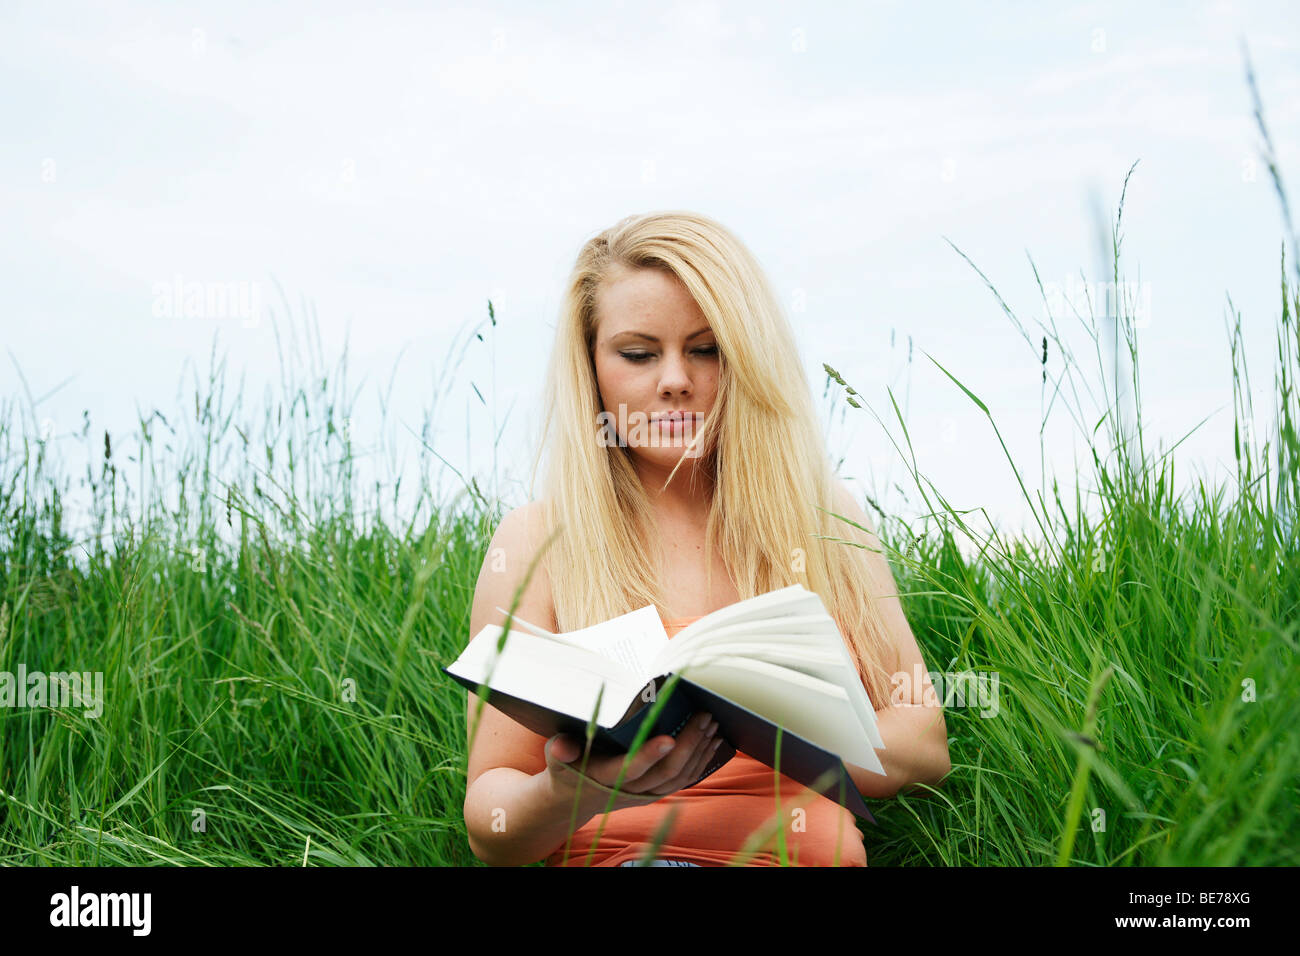 Young blonde woman sitting on a lawn, reading a book Stock Photo